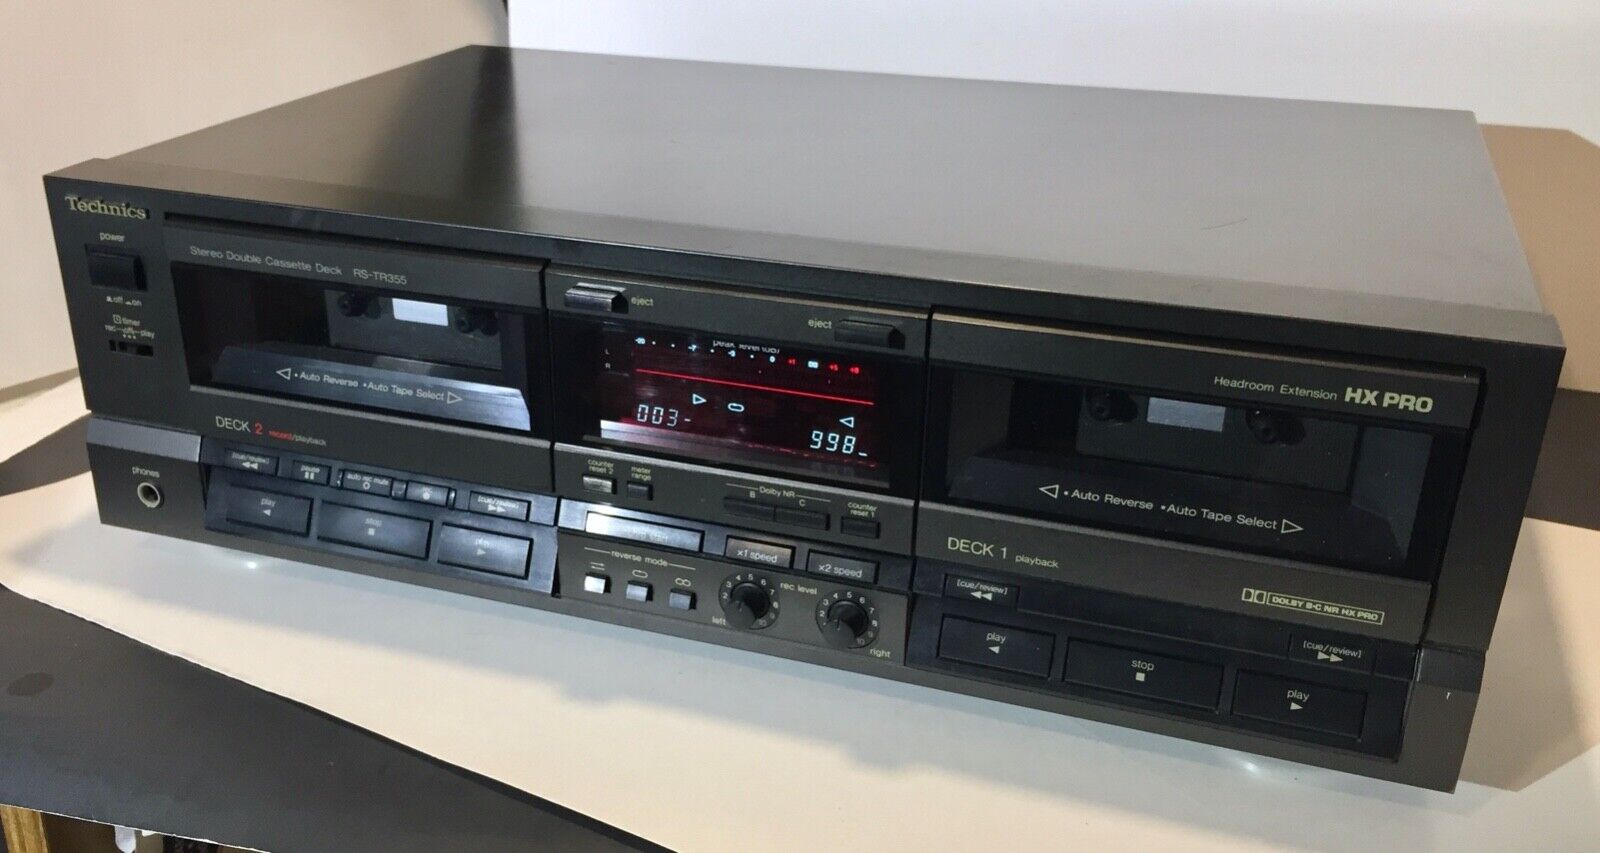 Technics Dual Tape Cassette Recorder Hx Pro Rs-tr355 Home Stereo Audio Tested